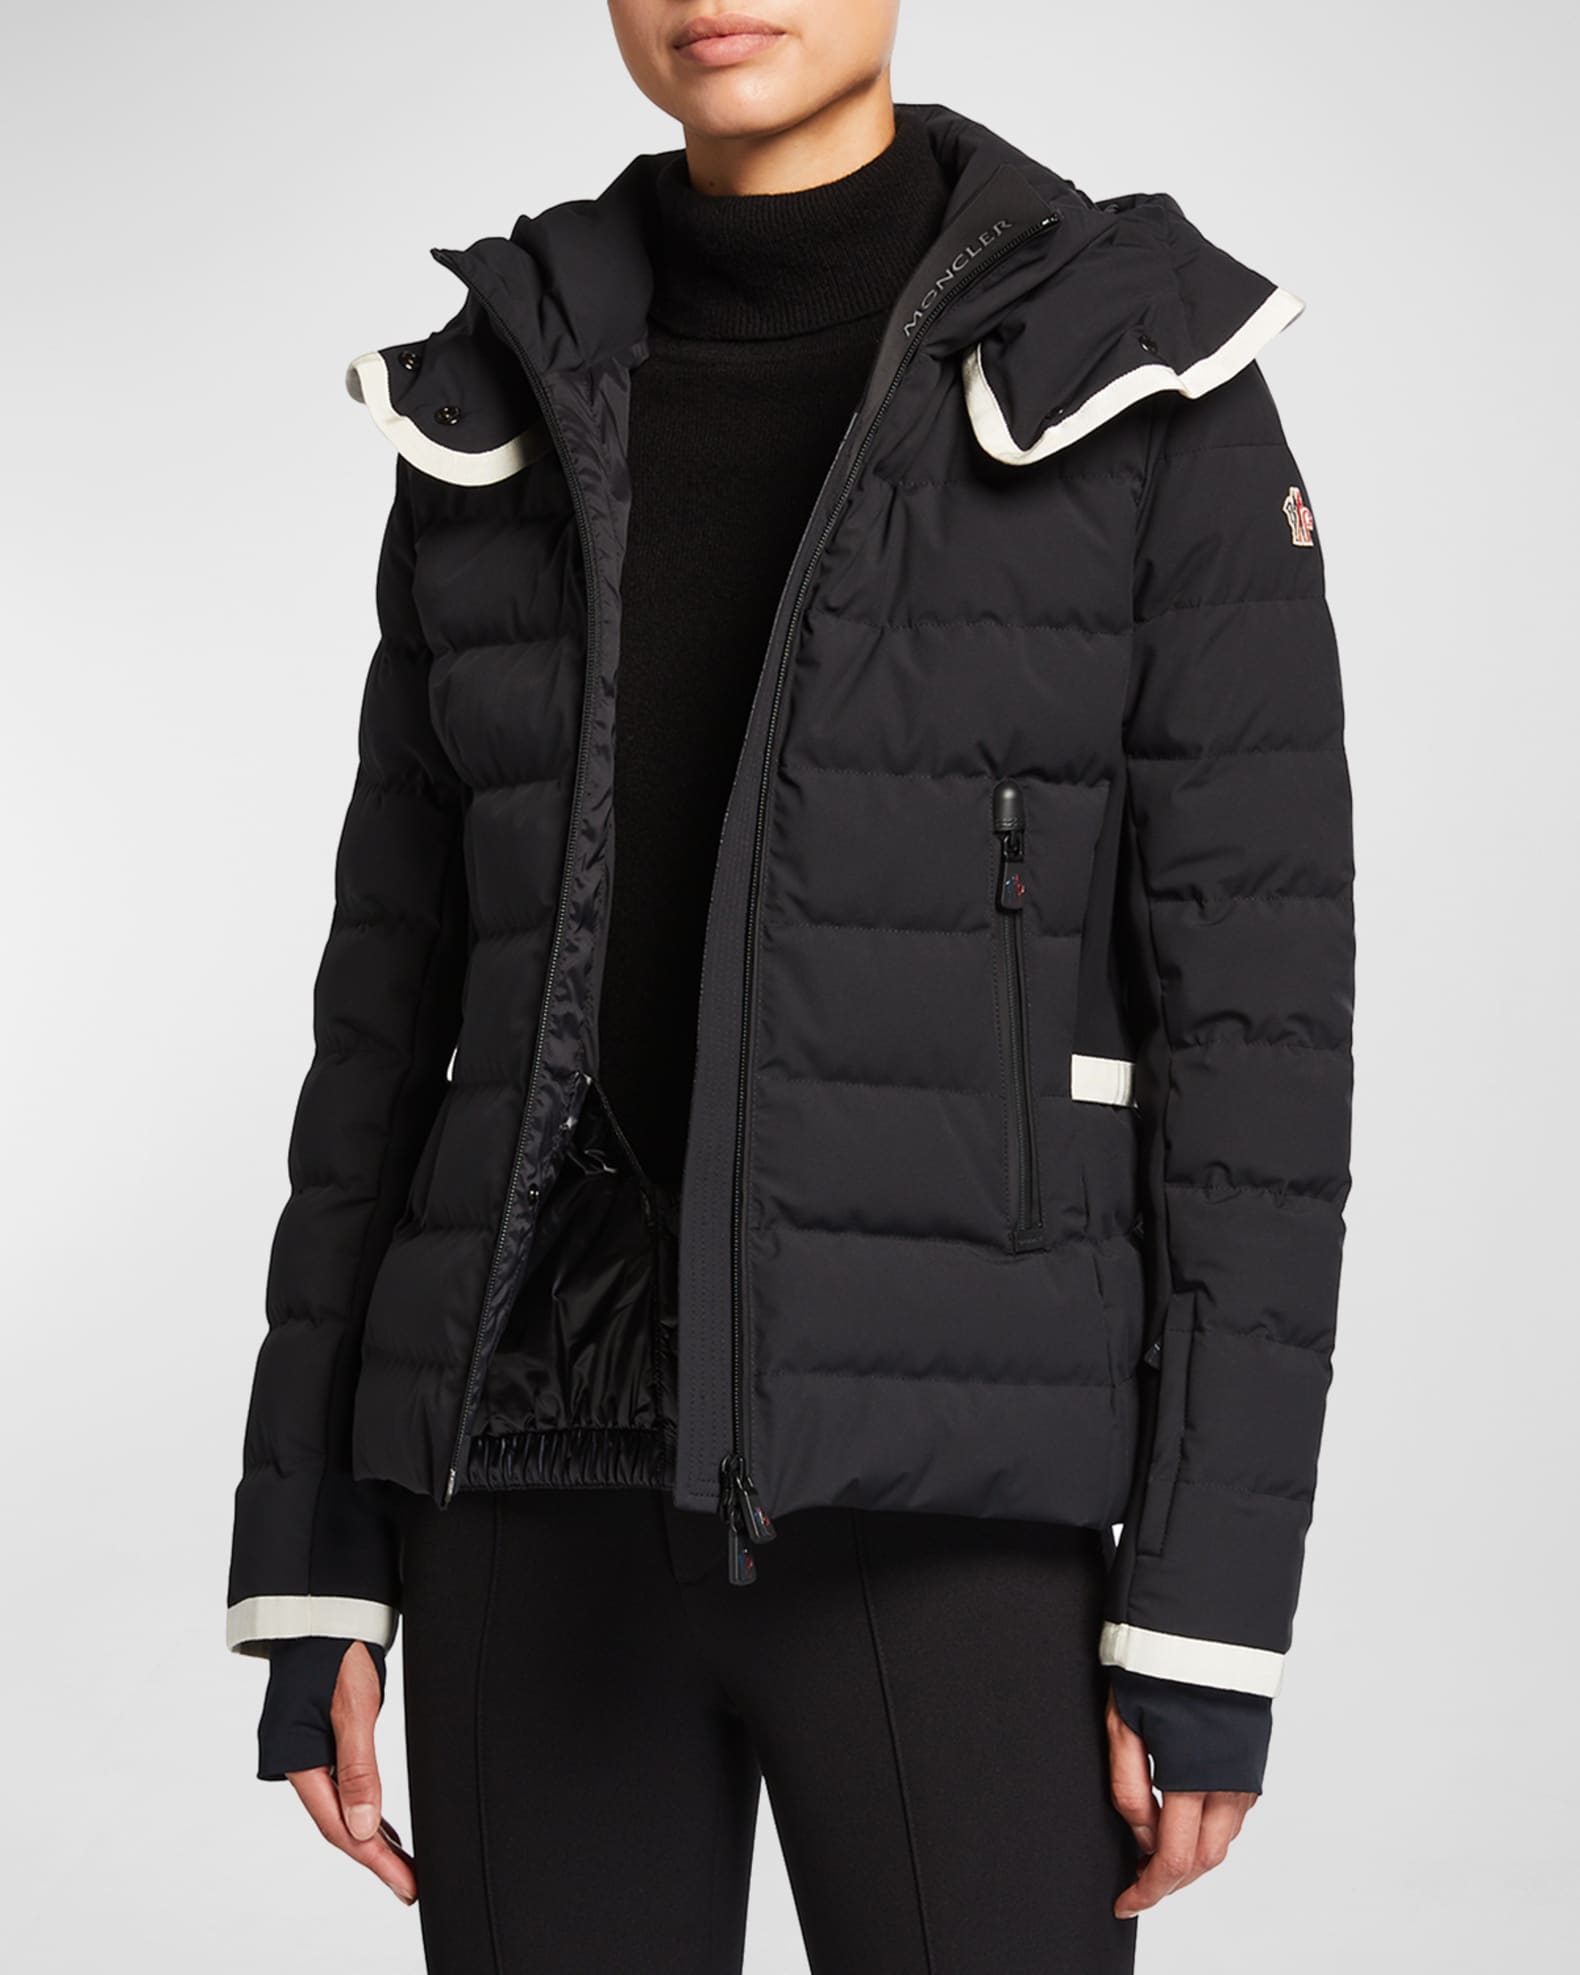 Moncler Grenoble Lamoura Fitted Down Ski Jacket | Neiman Marcus